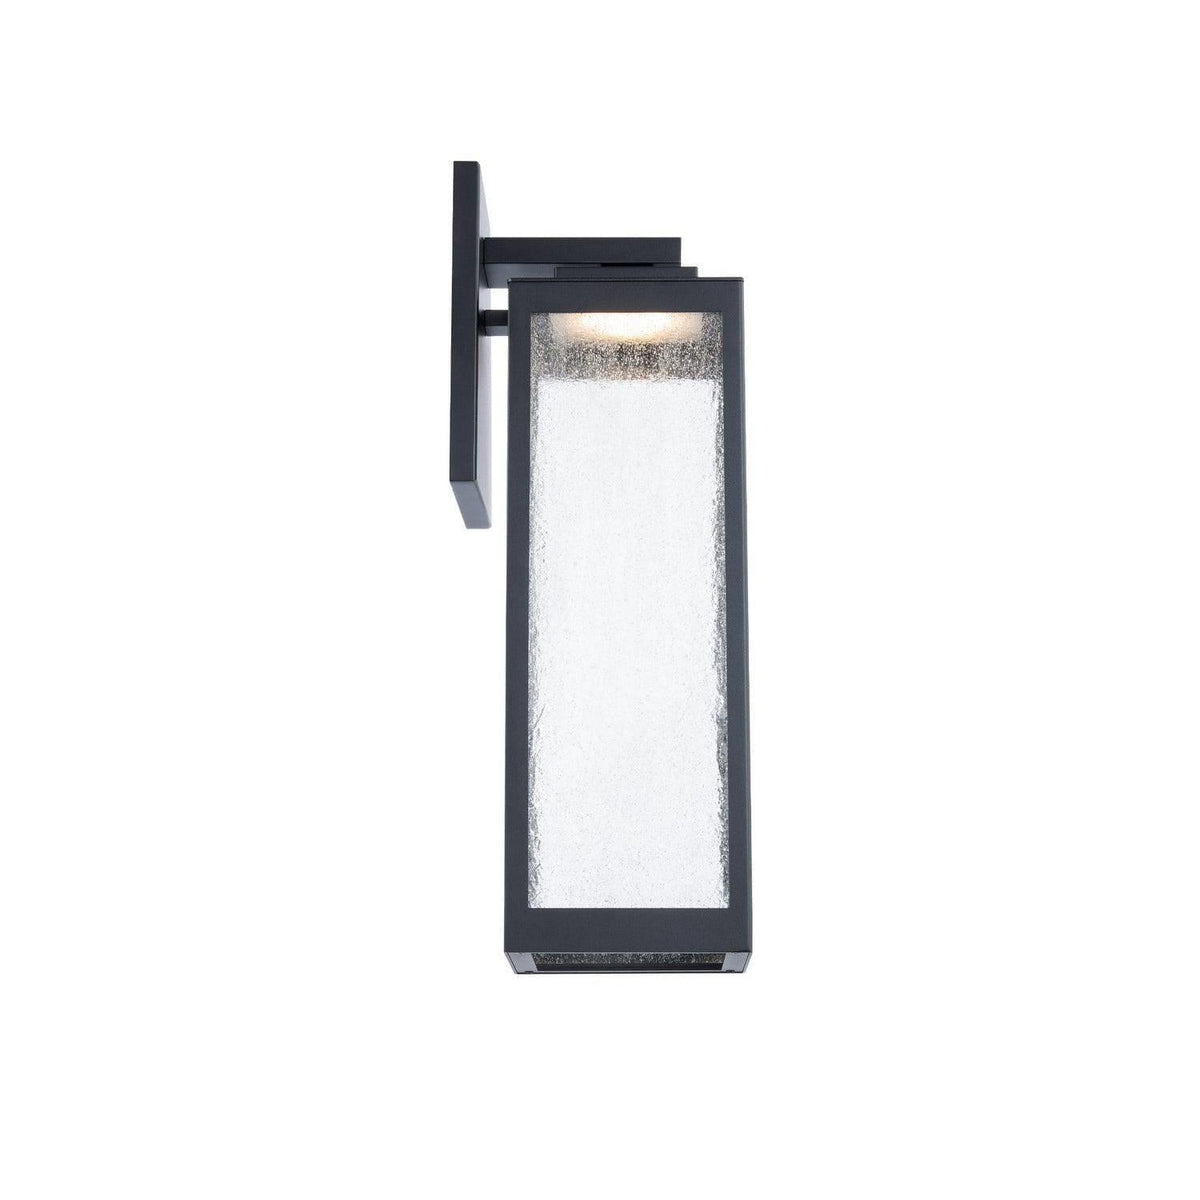 WAC Lighting - Amherst LED Outdoor Wall Sconce - WS-W17222-BK | Montreal Lighting & Hardware